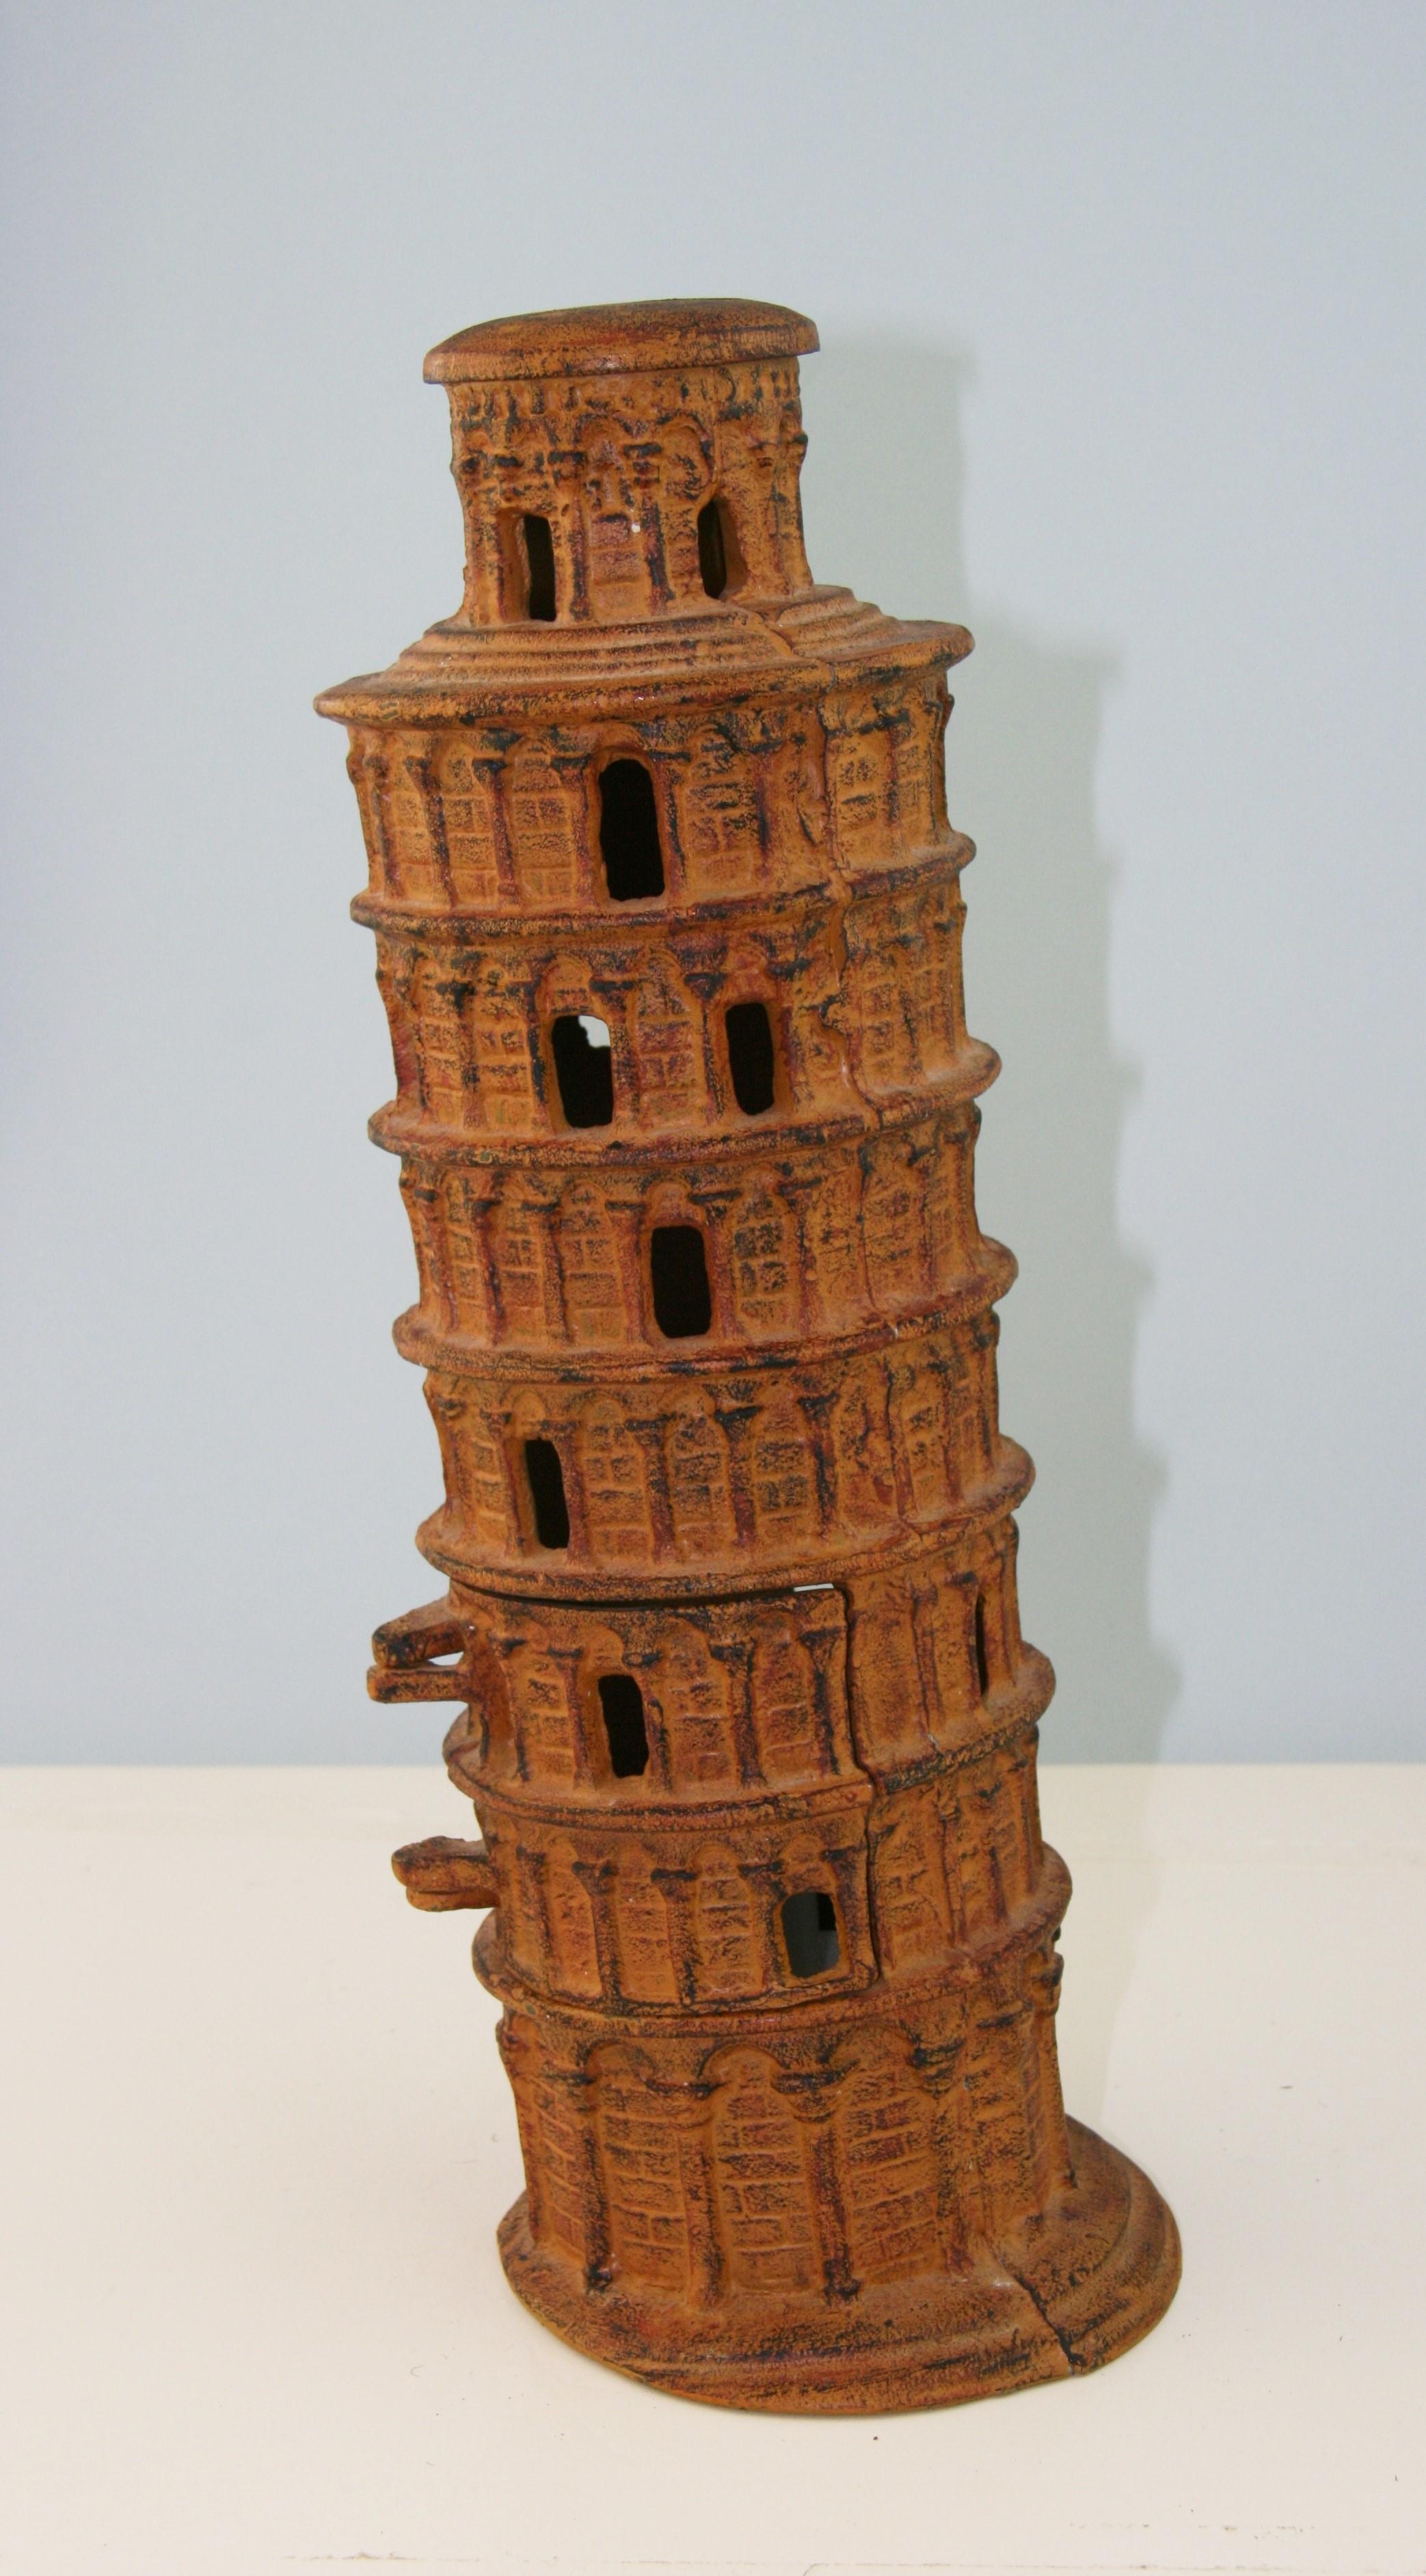 3-833 Japanese Leaning Tower of Pisa lantern is a special find an authentic old work of art.
 